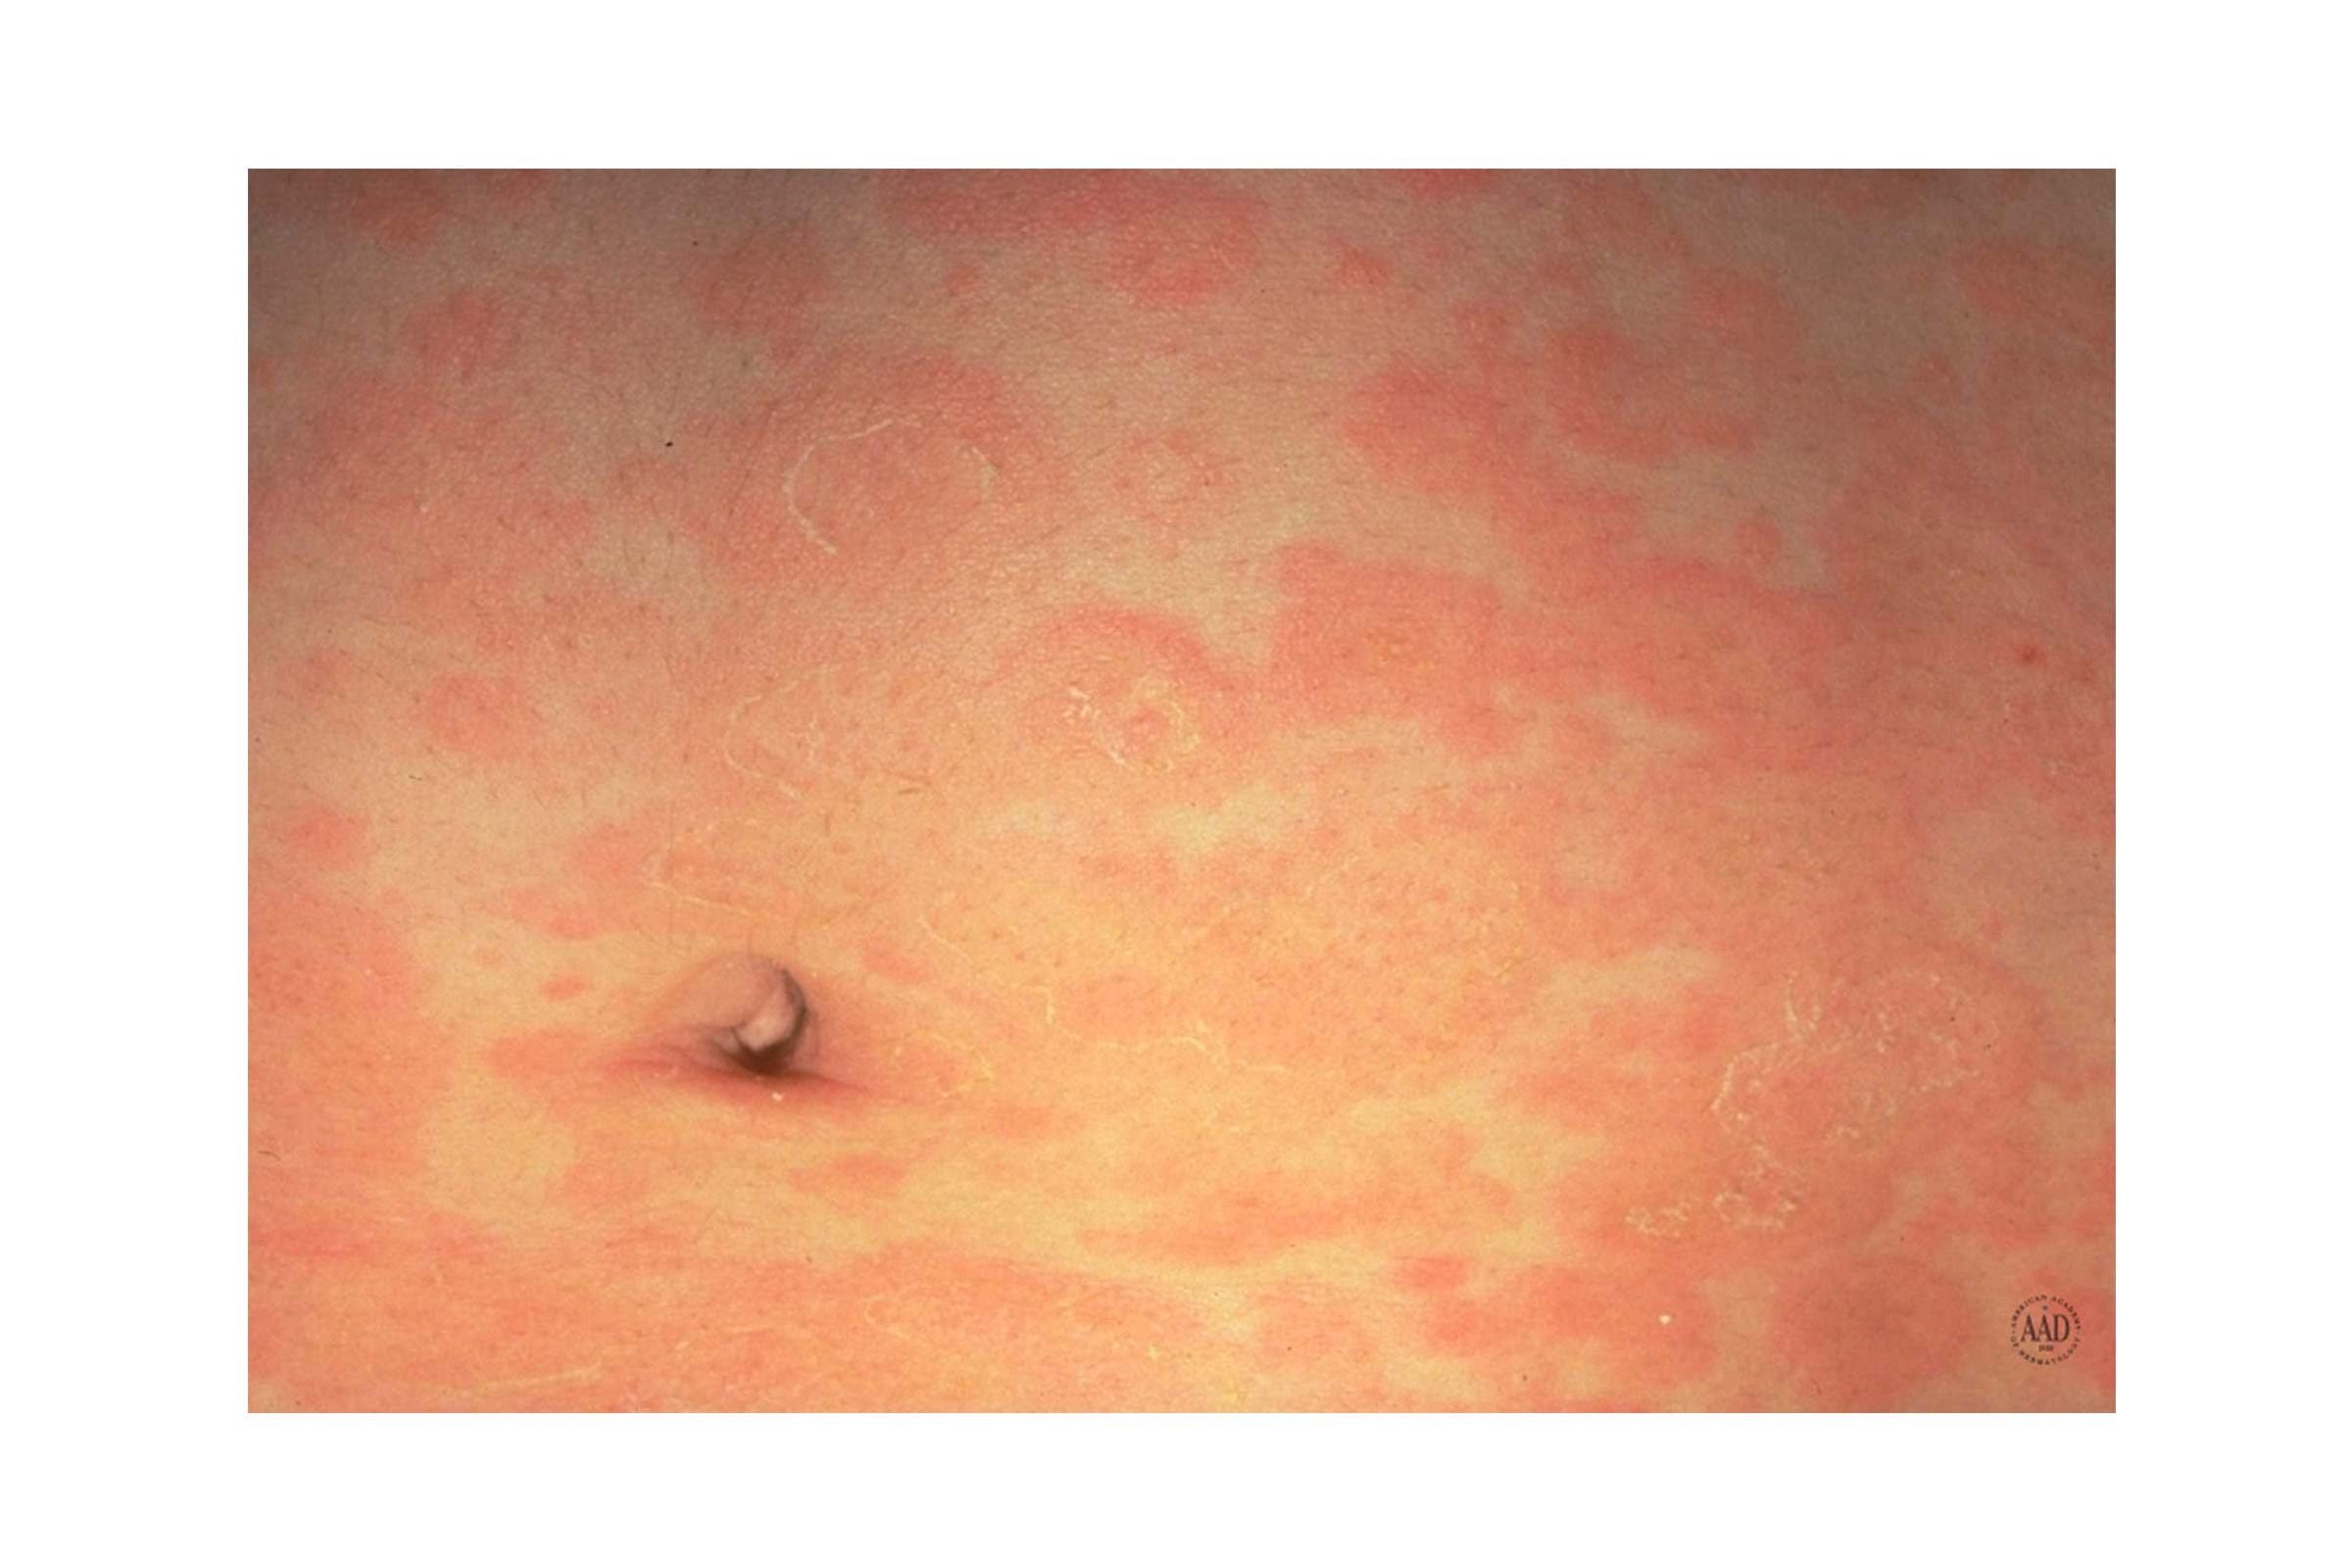 Pityriasis rosea on the stomach